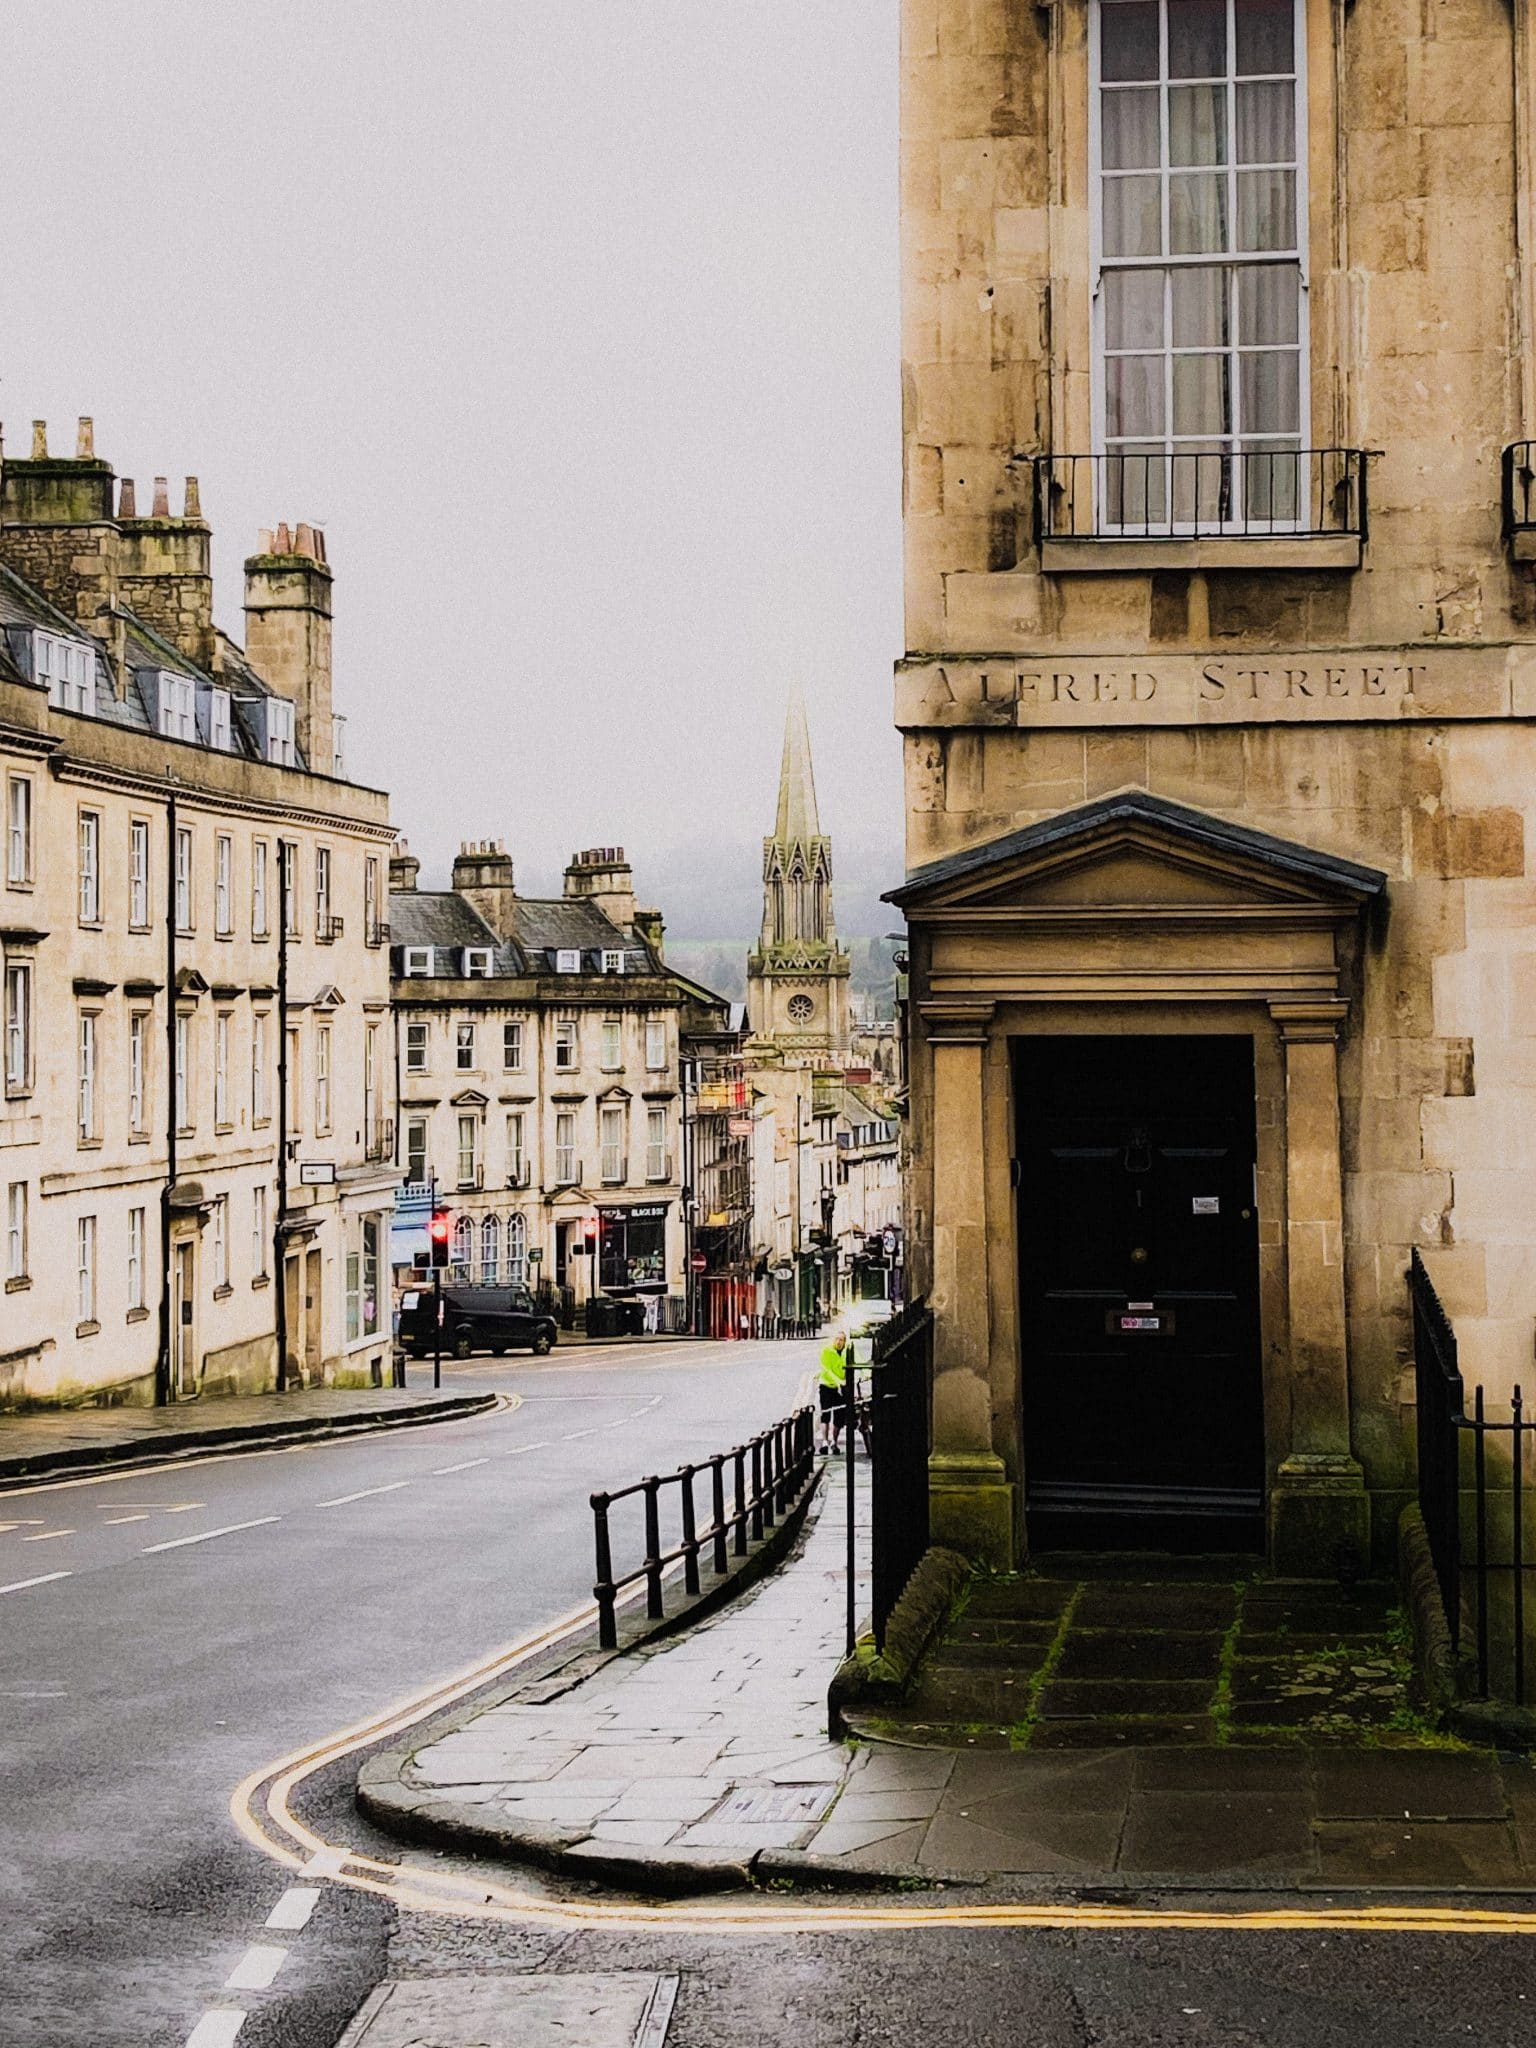 The beautiful architecture of Bath during the winter months 